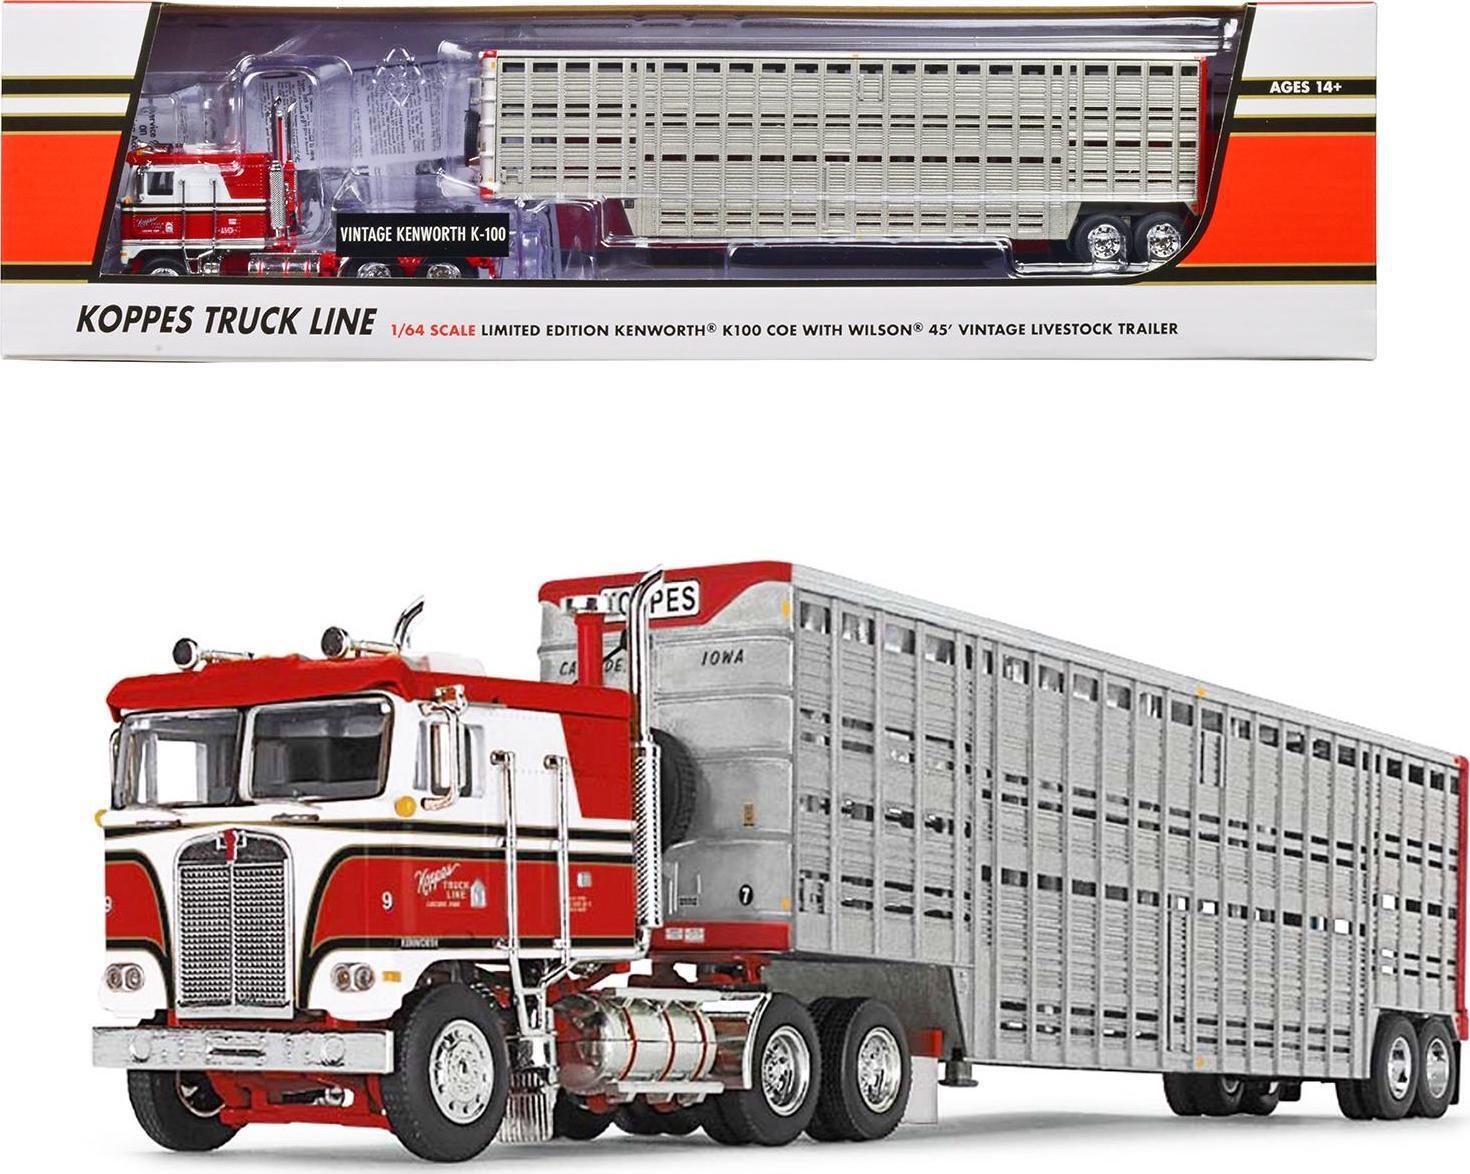 Kenworth K100 COE Red And White With 45' Wilson Vintage Livestock Trailer Koppes